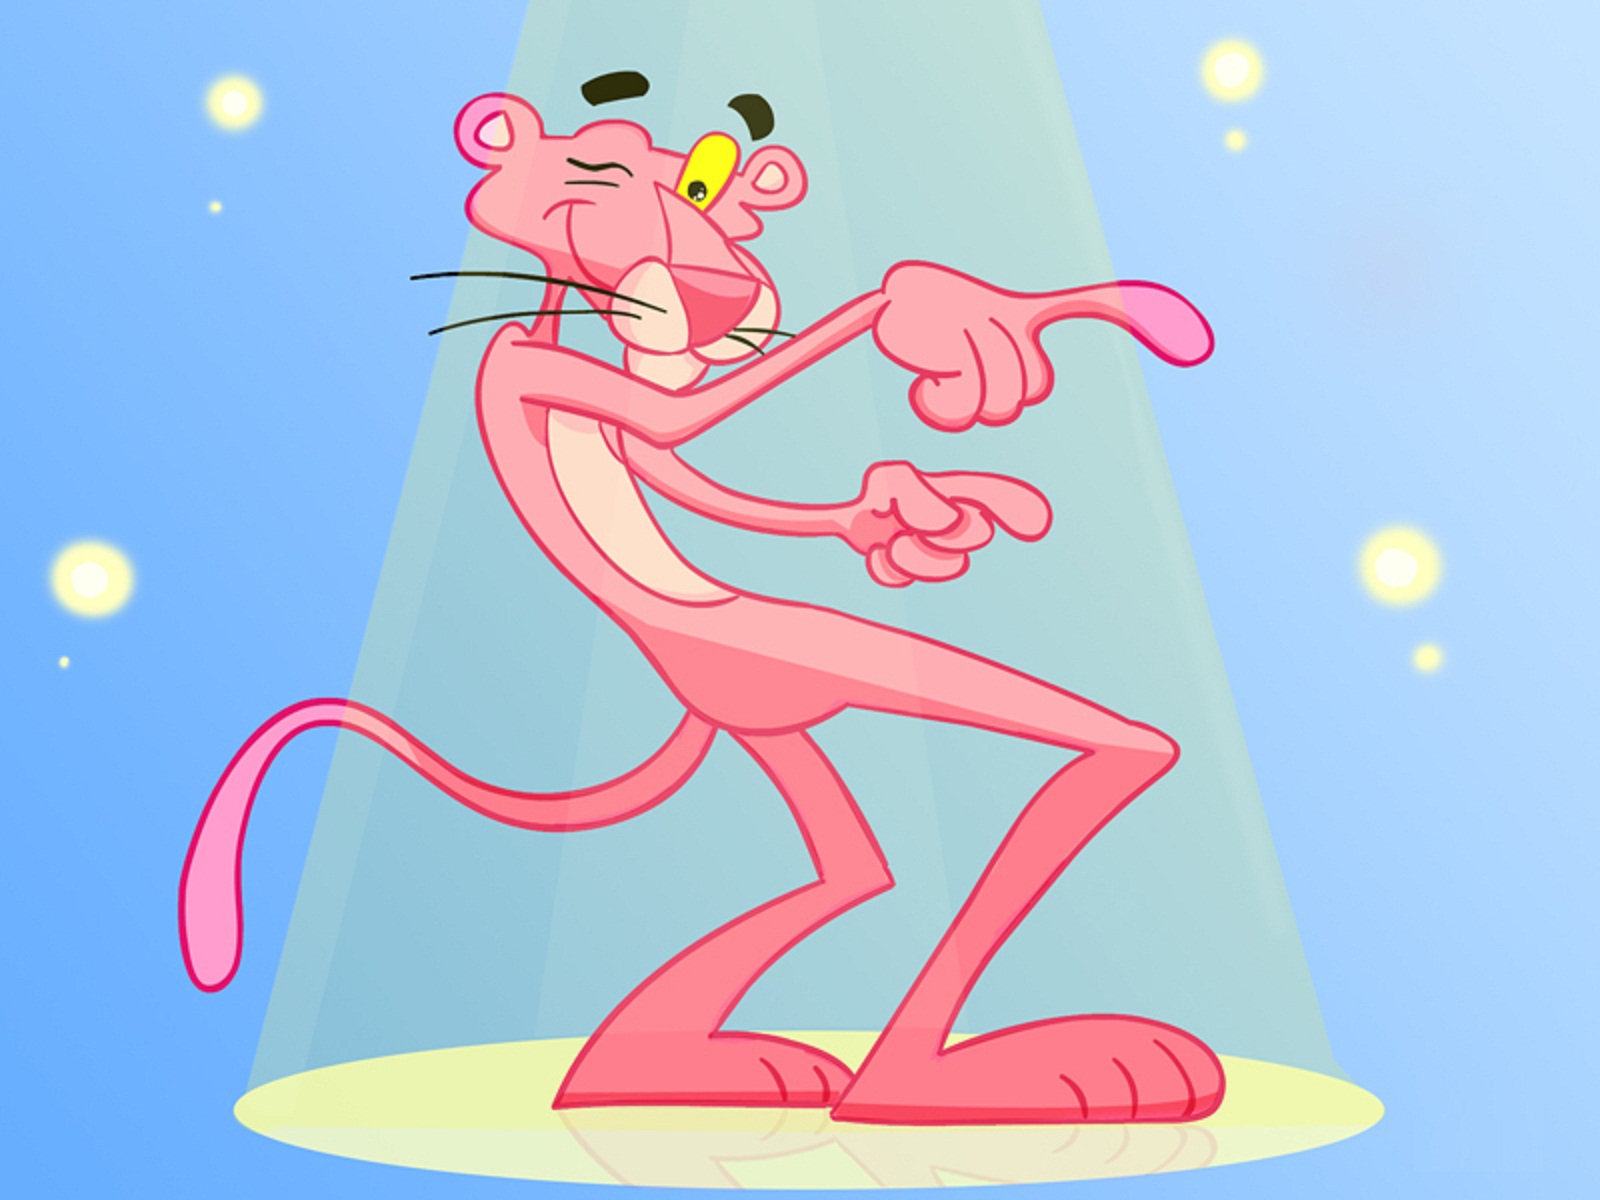 Disney HD Wallpapers: Pink Panther HD Wallpapers